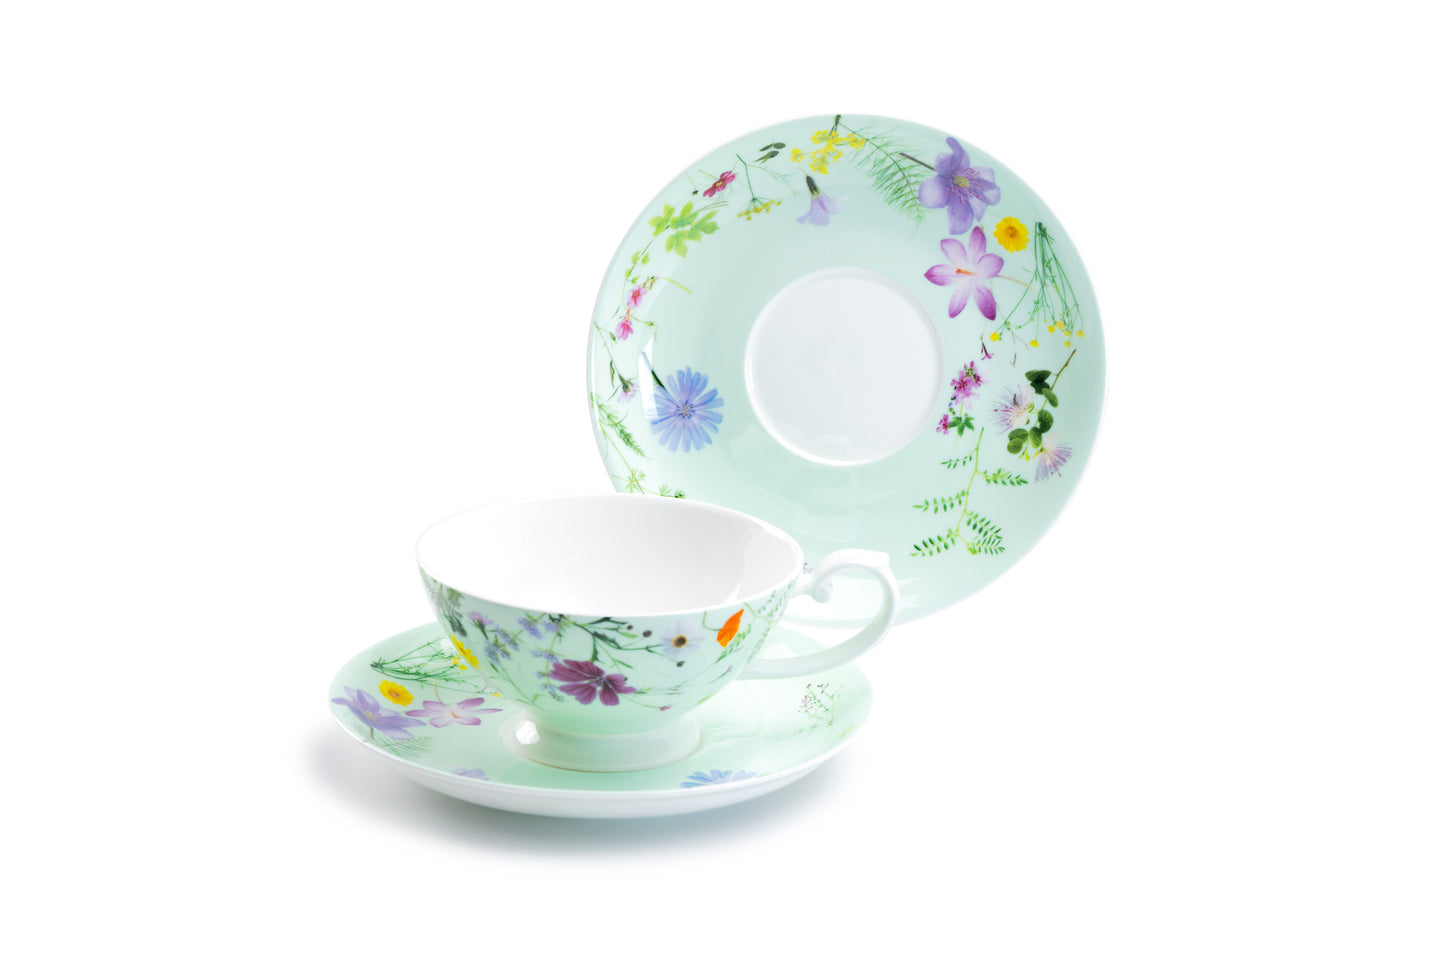 Stechcol Gracie Bone China Summer Meadow Mint Bone China Cup and Saucer Set